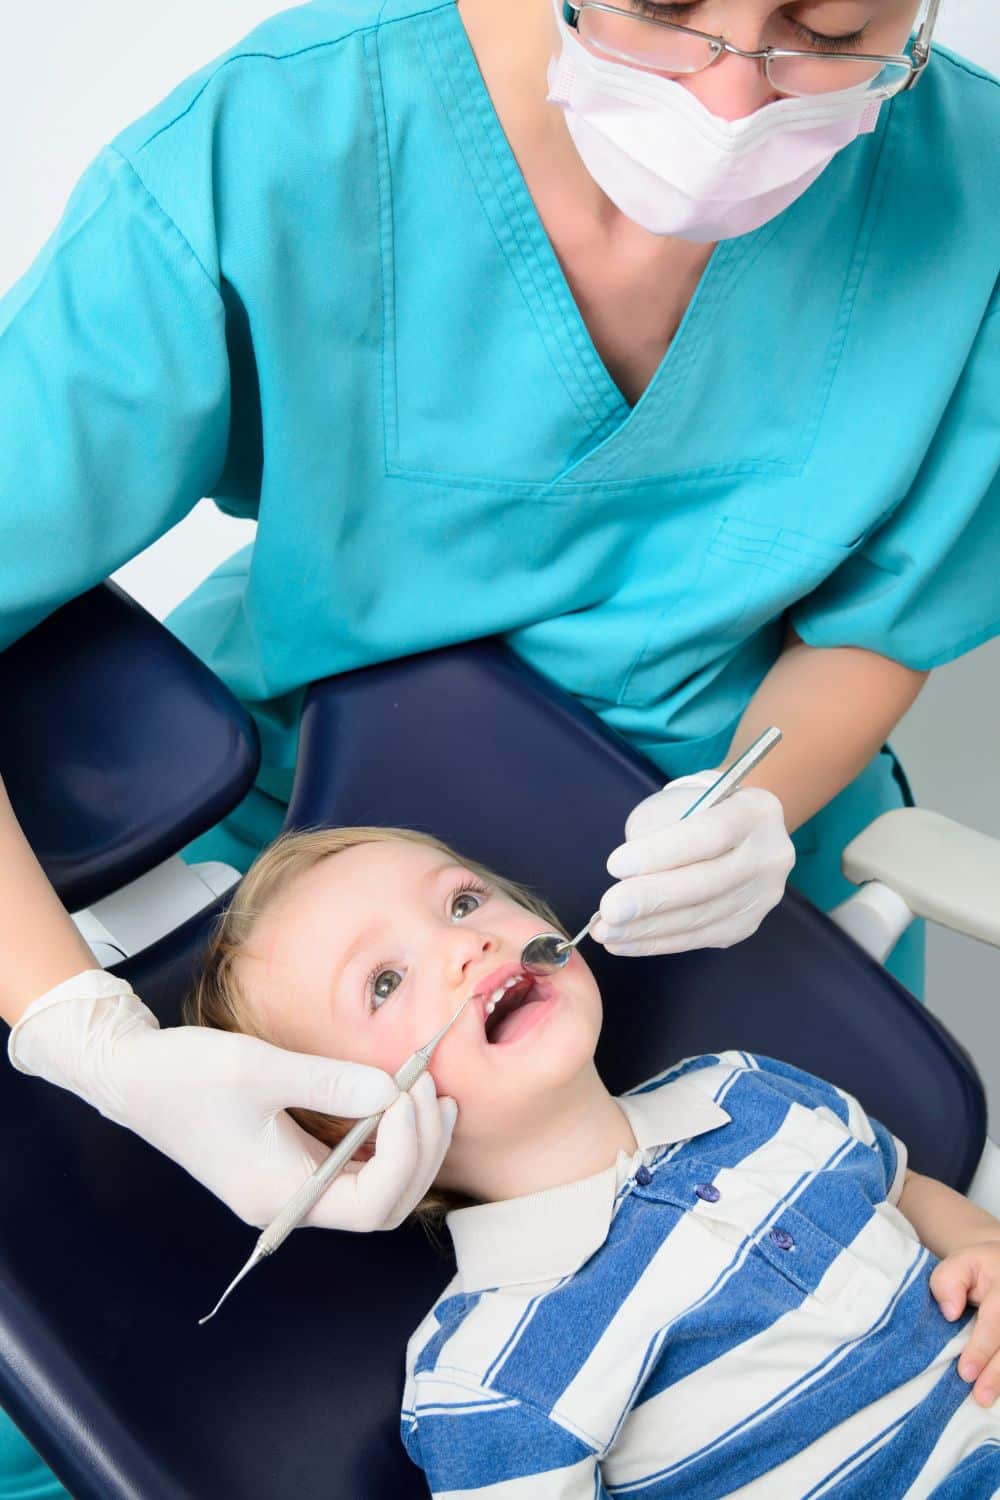 4 Simple Ways To Keep Your Kids Happy At The Dentist